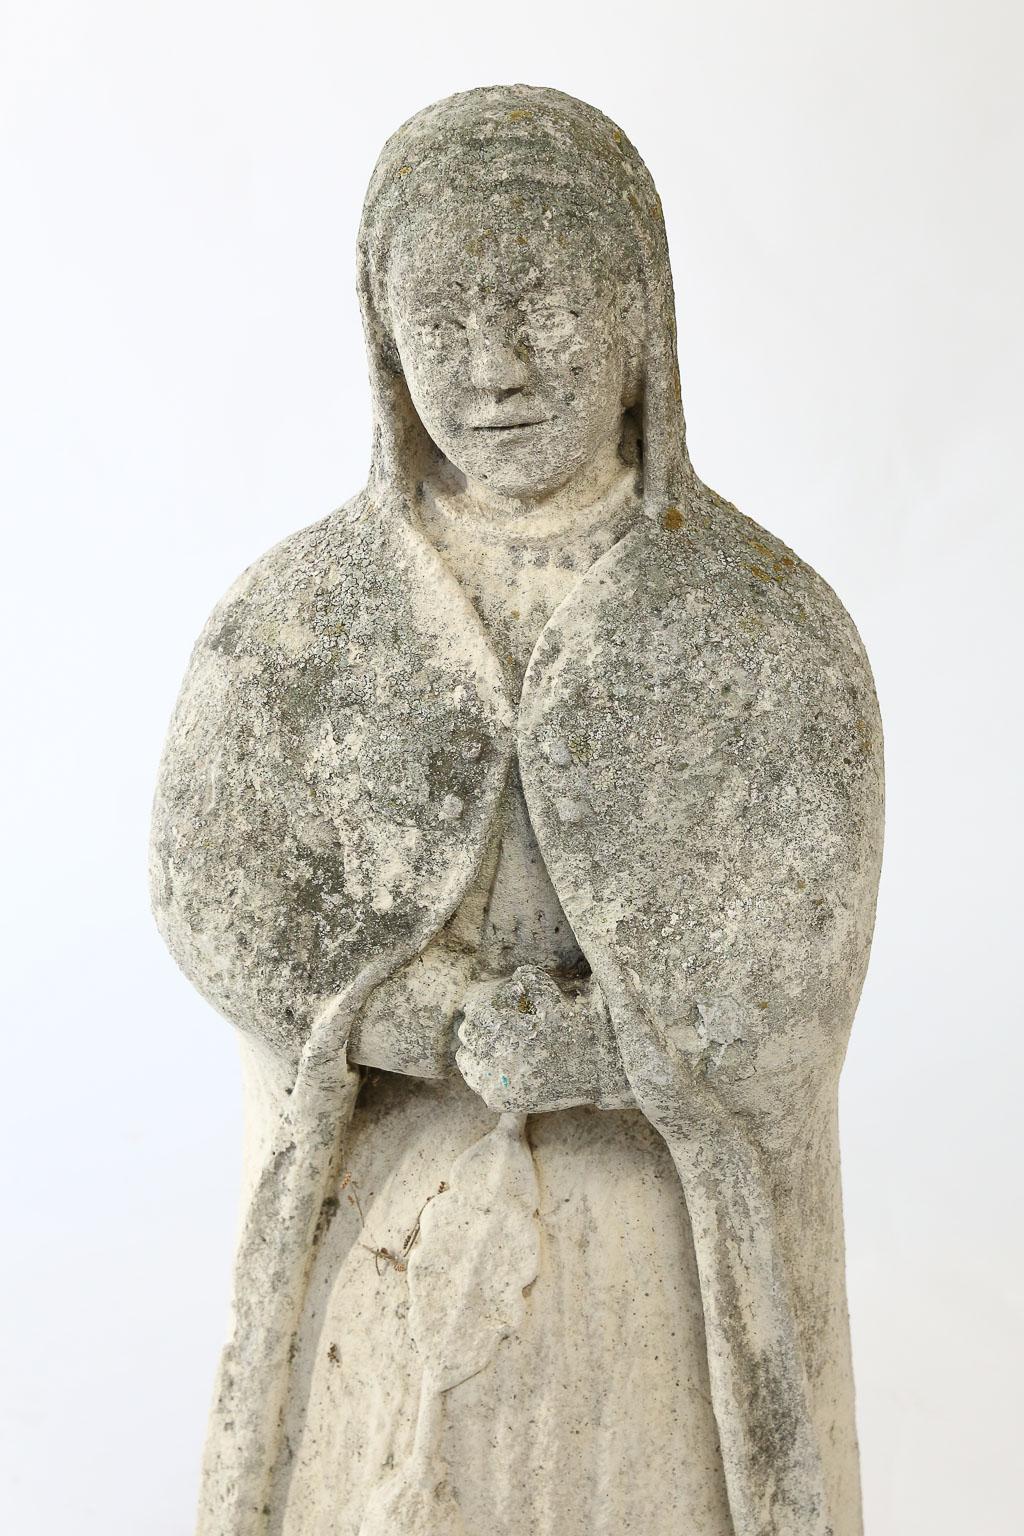 This beautiful concrete statue of a nun will be a lovely addition to your garden or home interior. The expression on her sweet face leads us to believe she is in deep prayer. As she was found in France we believe she is a replica of a French